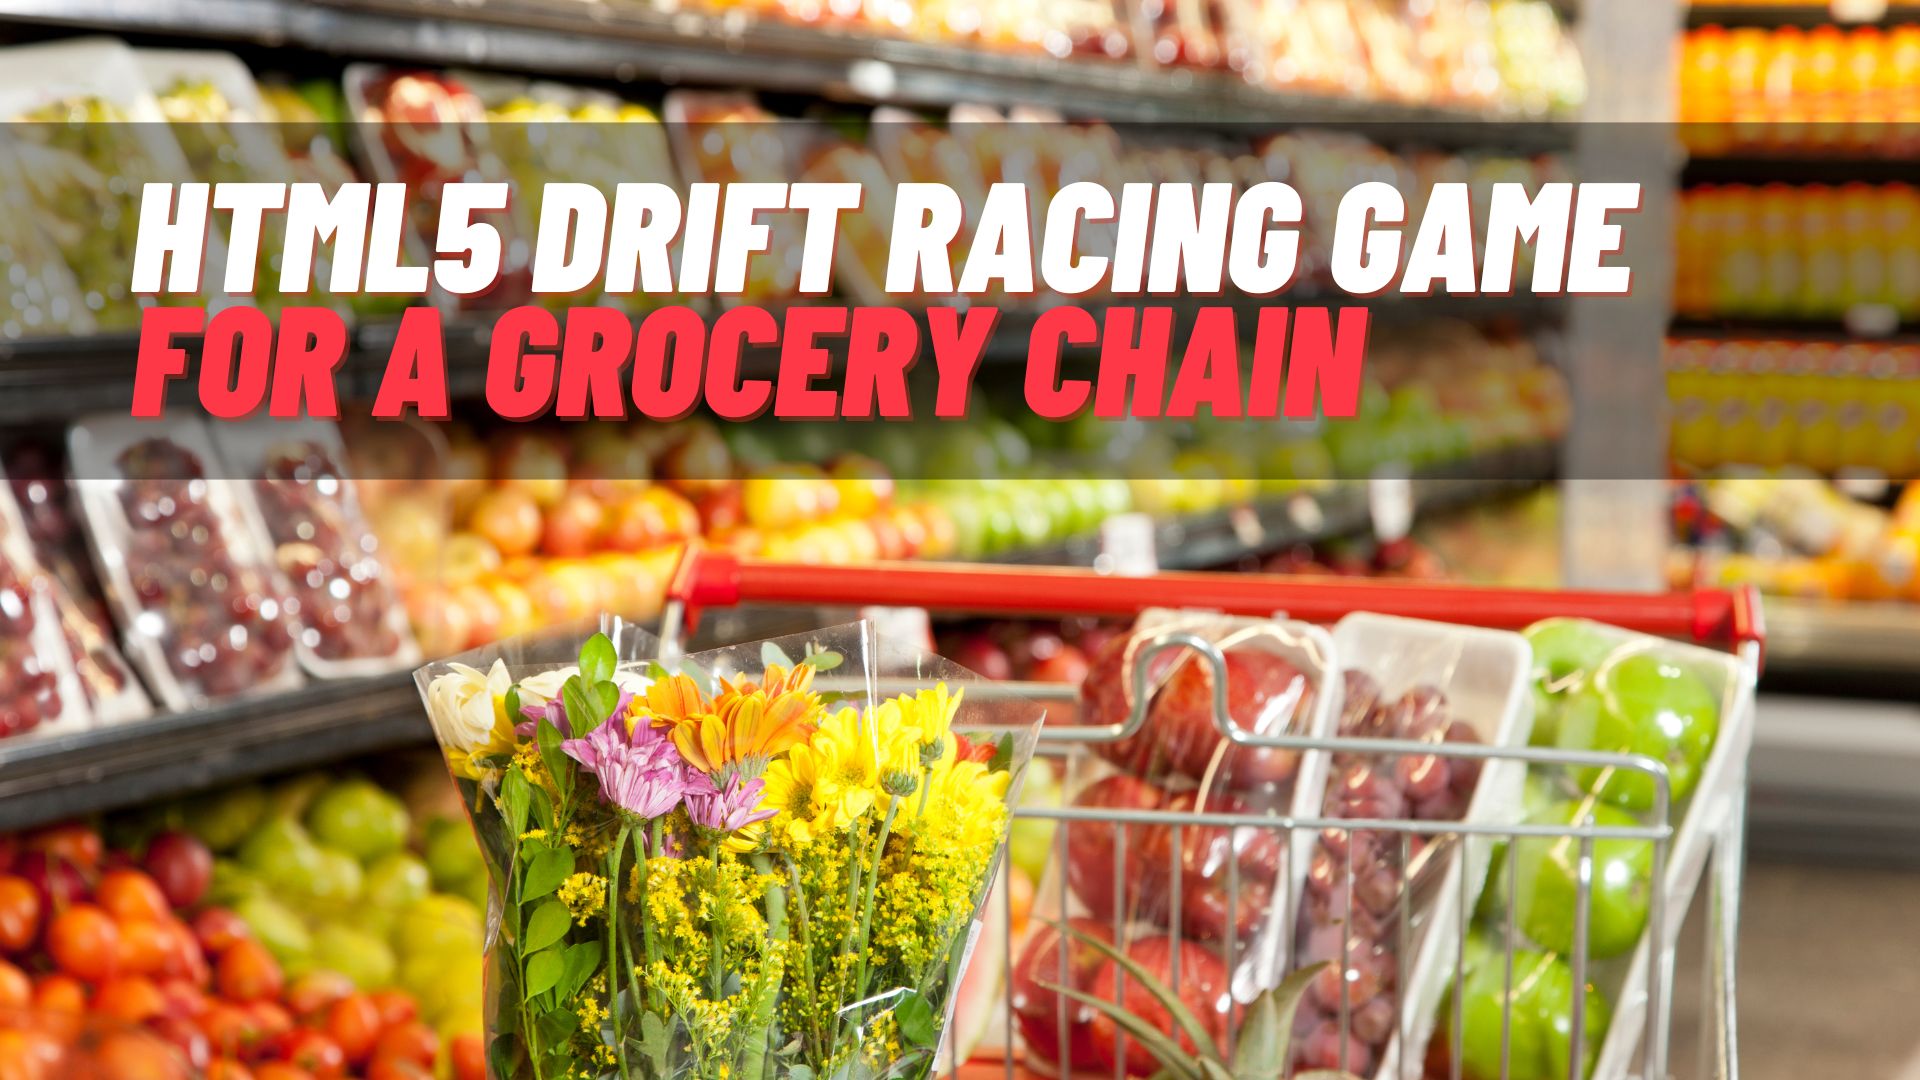 HTML5 Drift Racing Game For A Grocery Chain